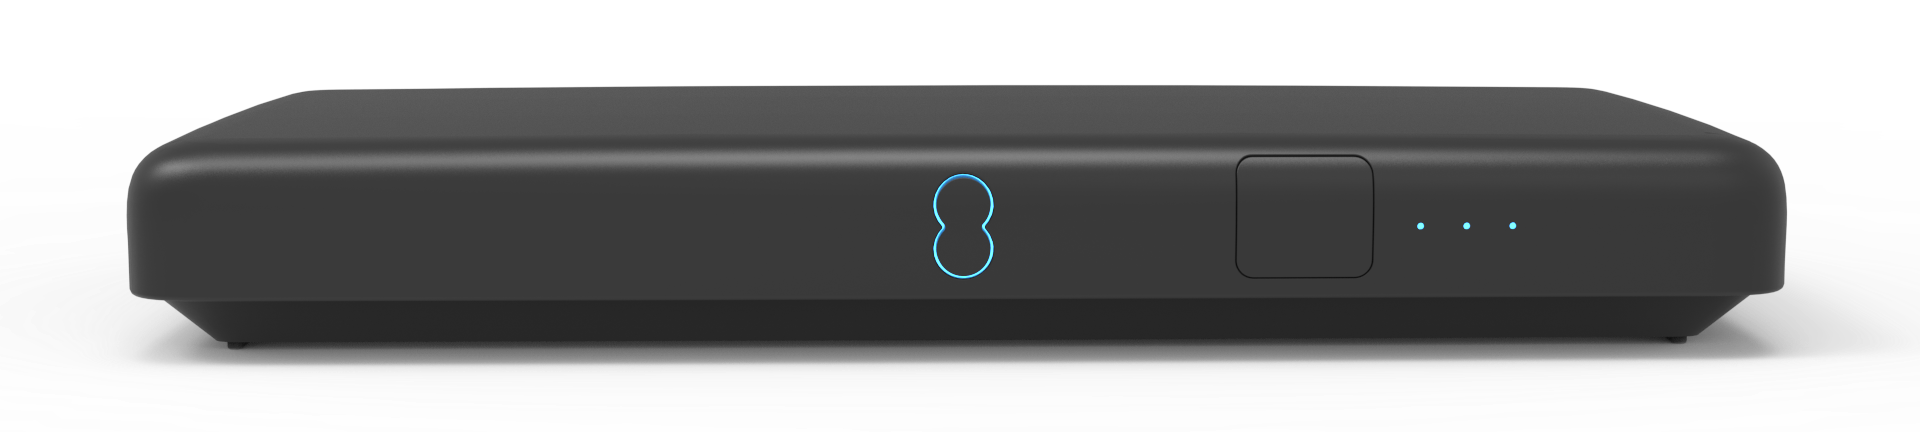 Picture of an EE TV Box Pro